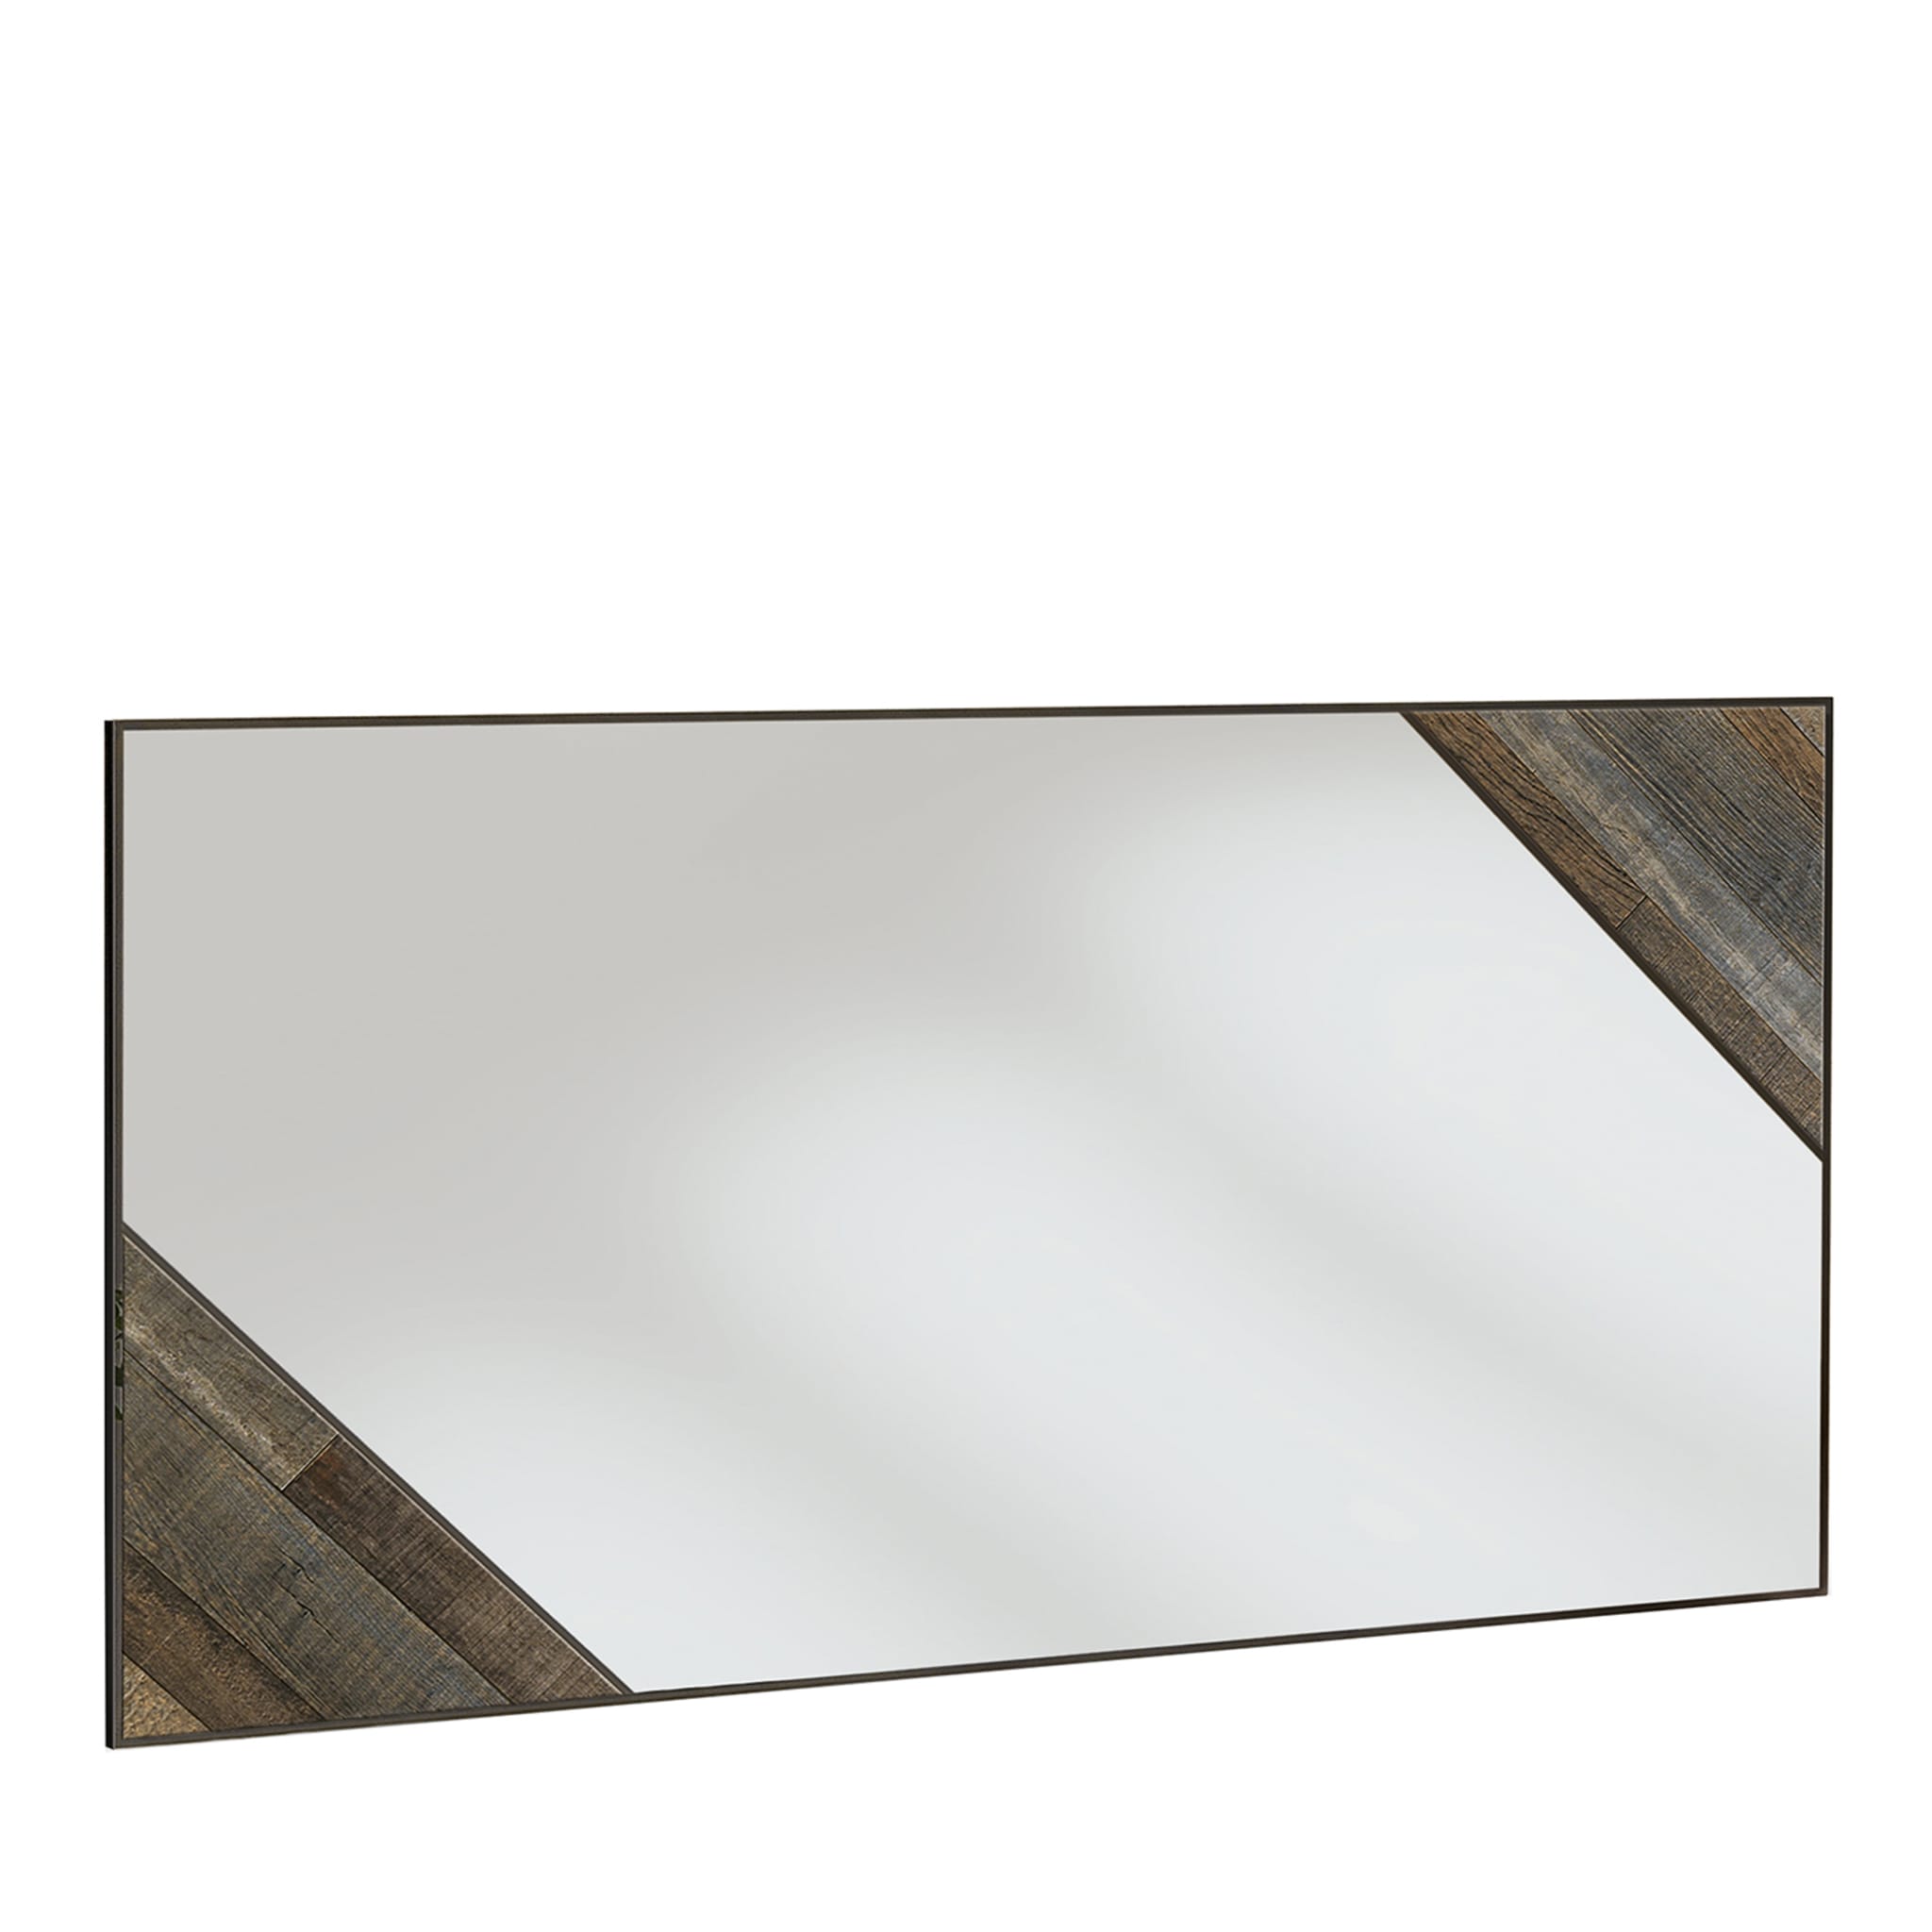 Rectangular Mirror with Old Wood Inlays - Main view